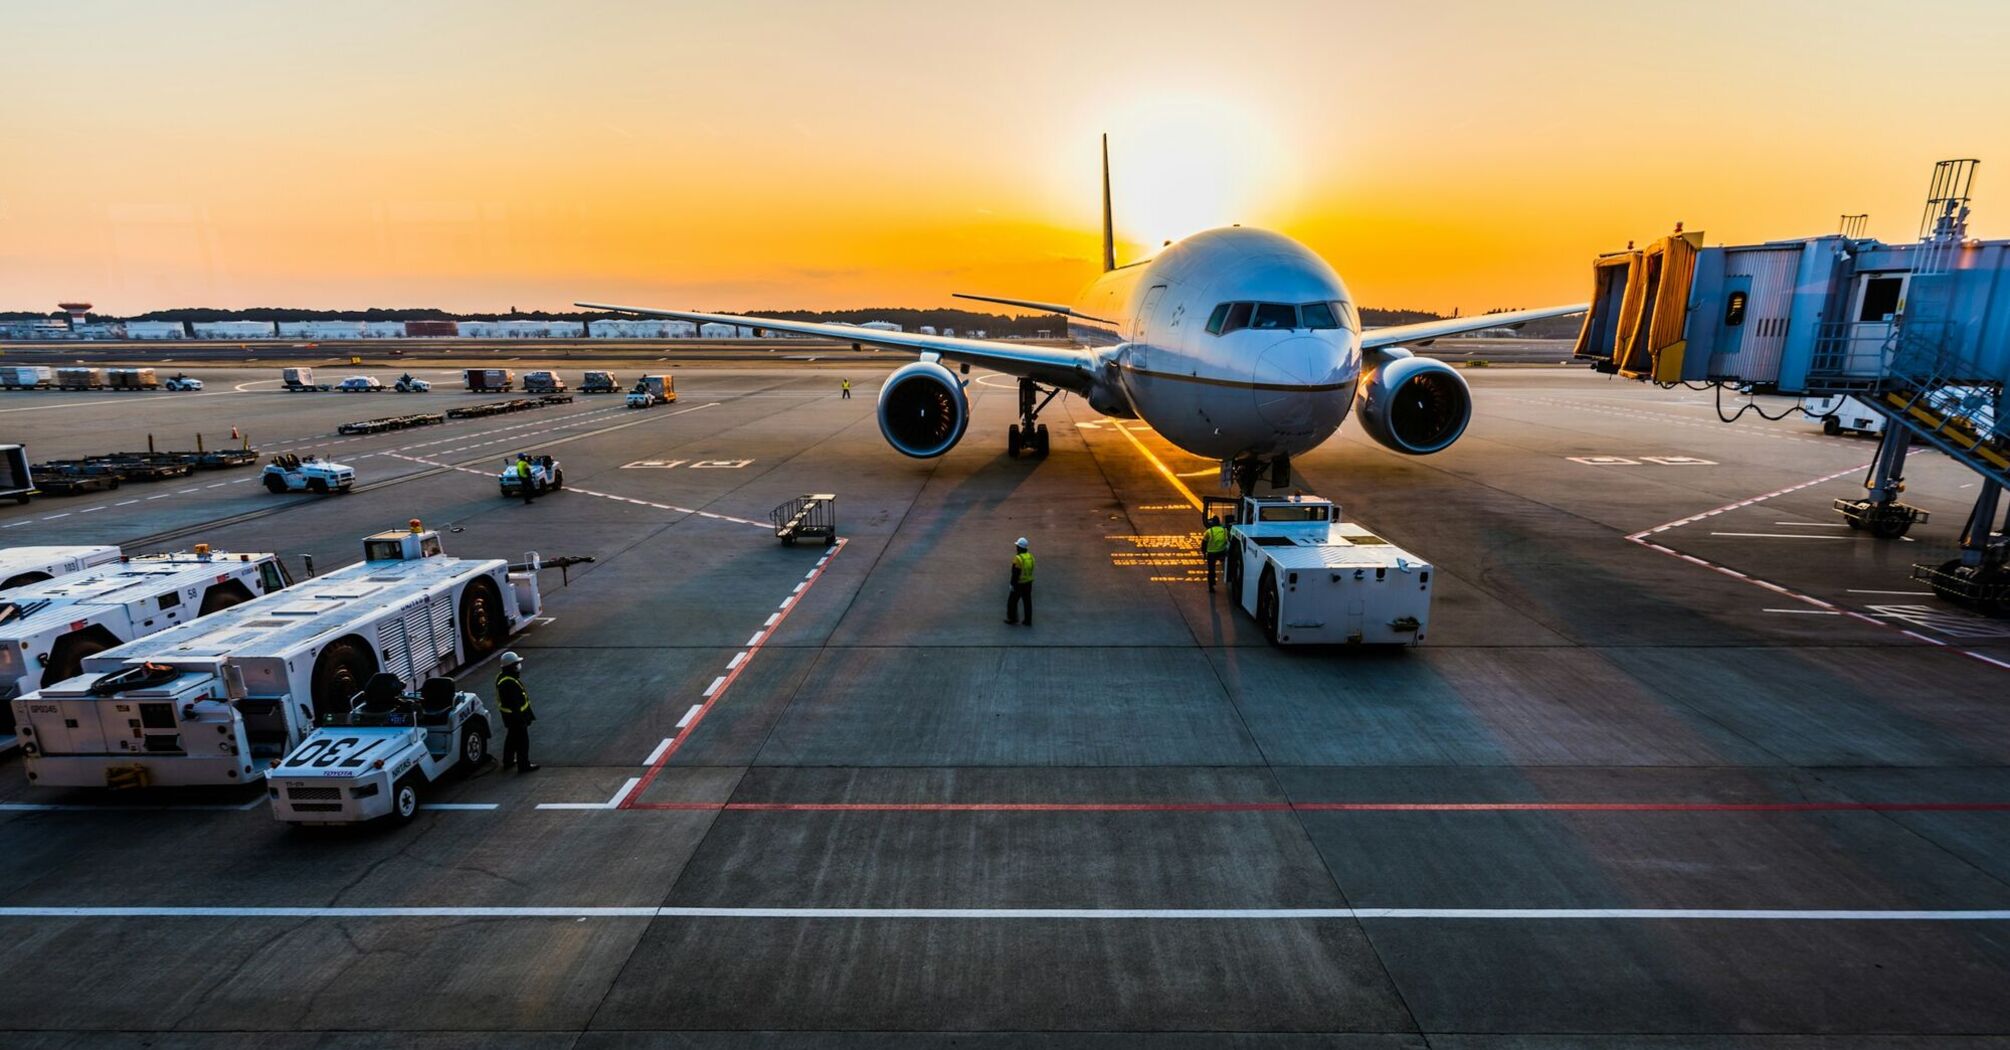 Airplane at airport during sunset